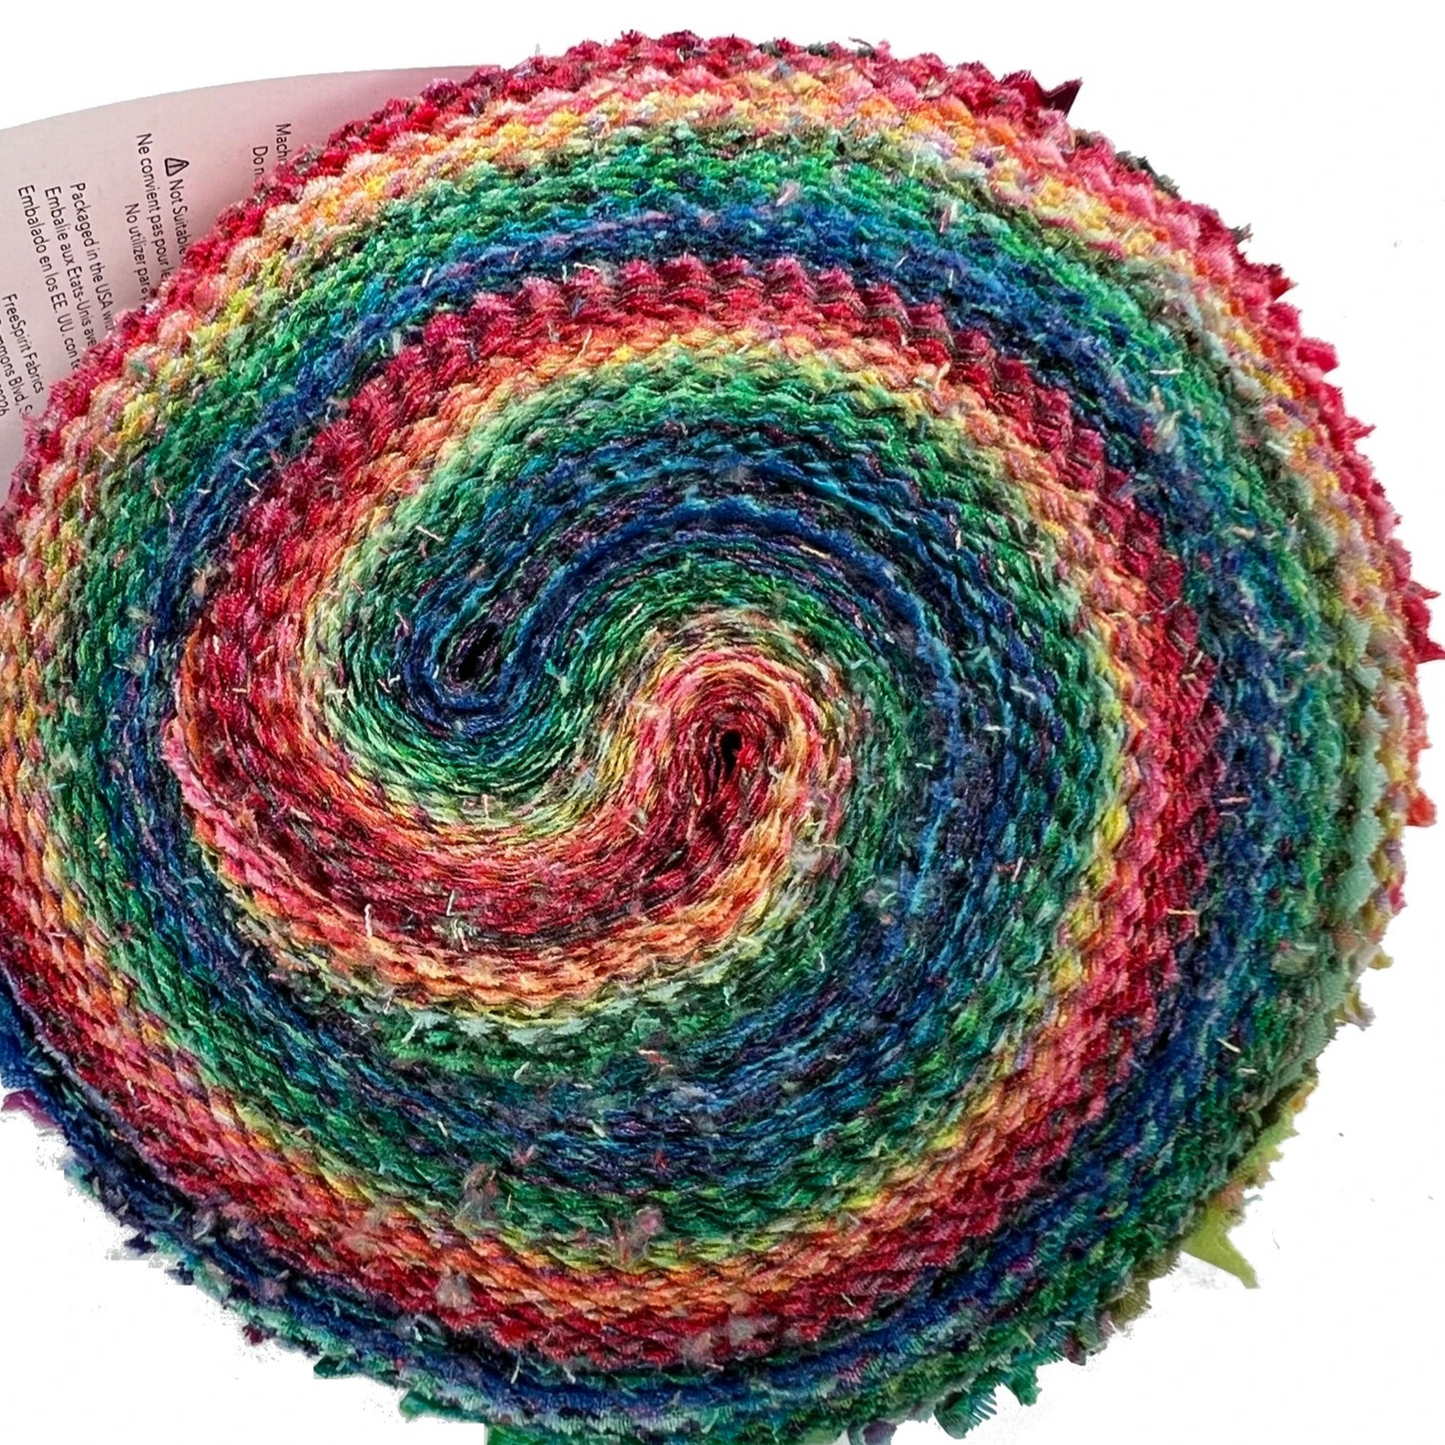 Jelly Roll Kaffe Fassett quilting cotton - Classic collection rainbow